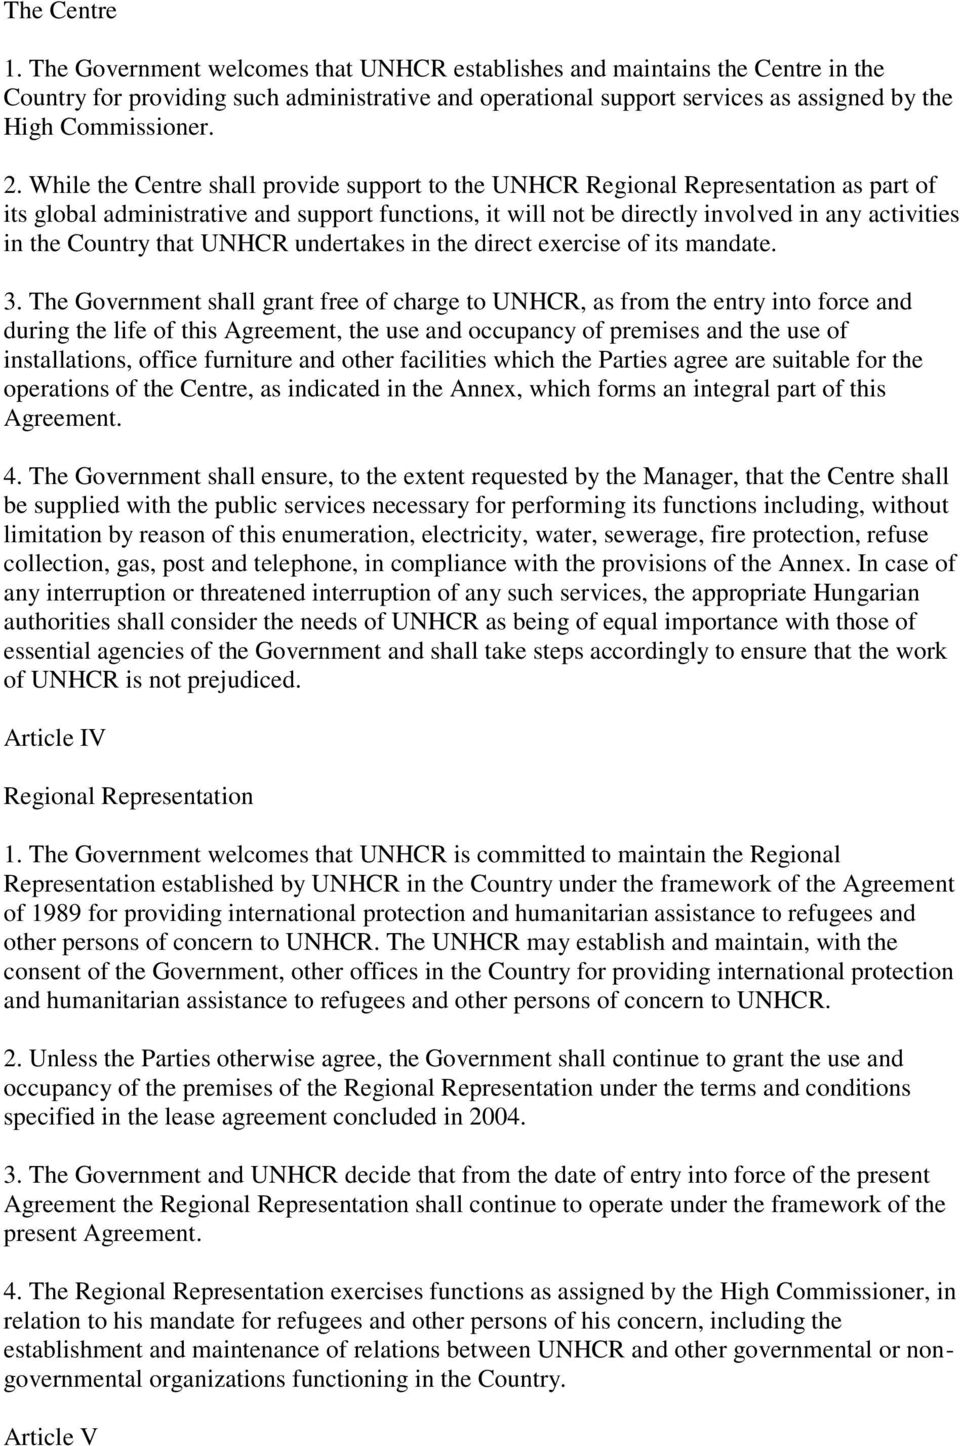 While the Centre shall provide support to the UNHCR Regional Representation as part of its global administrative and support functions, it will not be directly involved in any activities in the